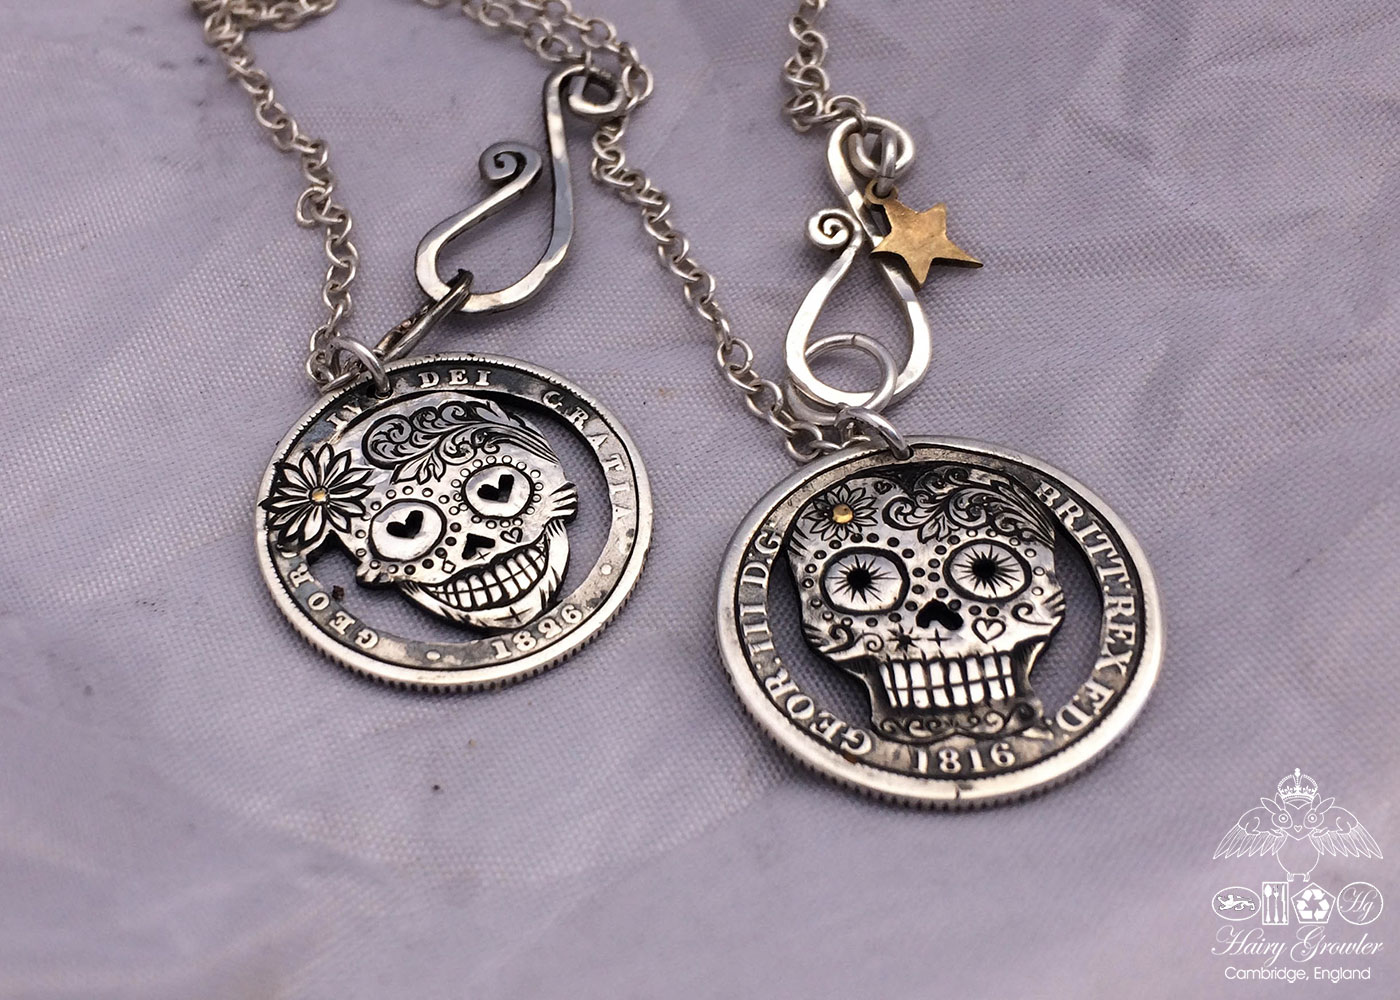 Handmade and upcycled silver shilling coin day-of-the-dead skull necklace